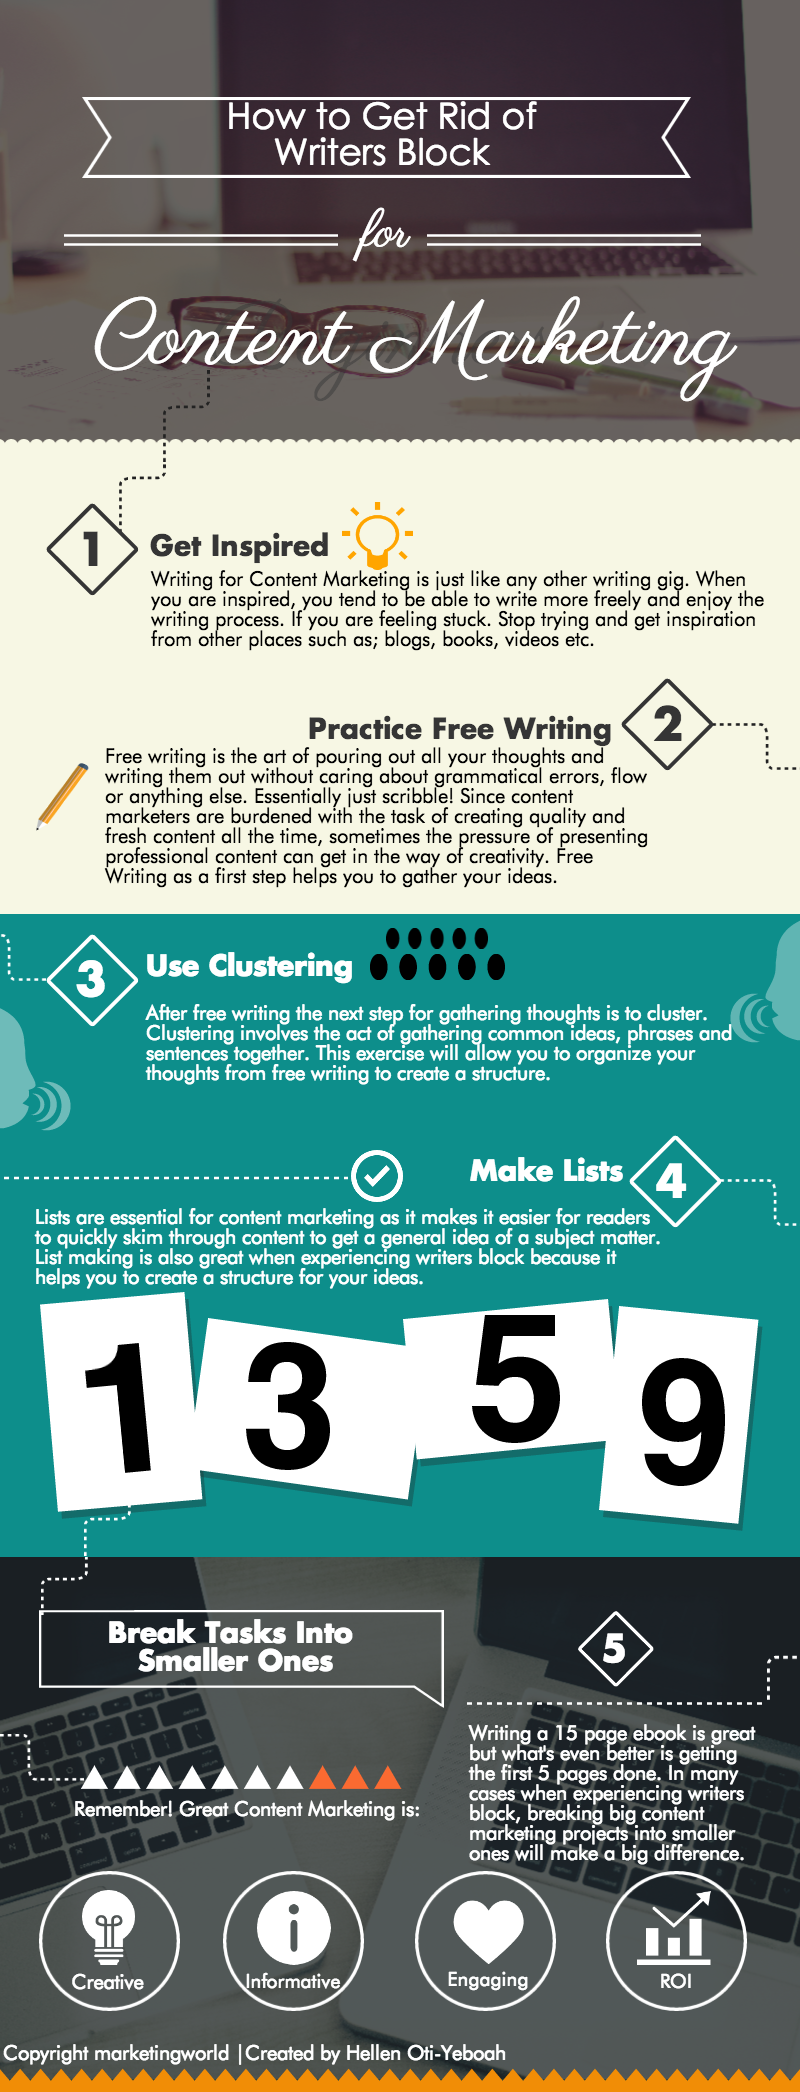 Infographic] How to Get Rid of Writers Block for Content Marketing